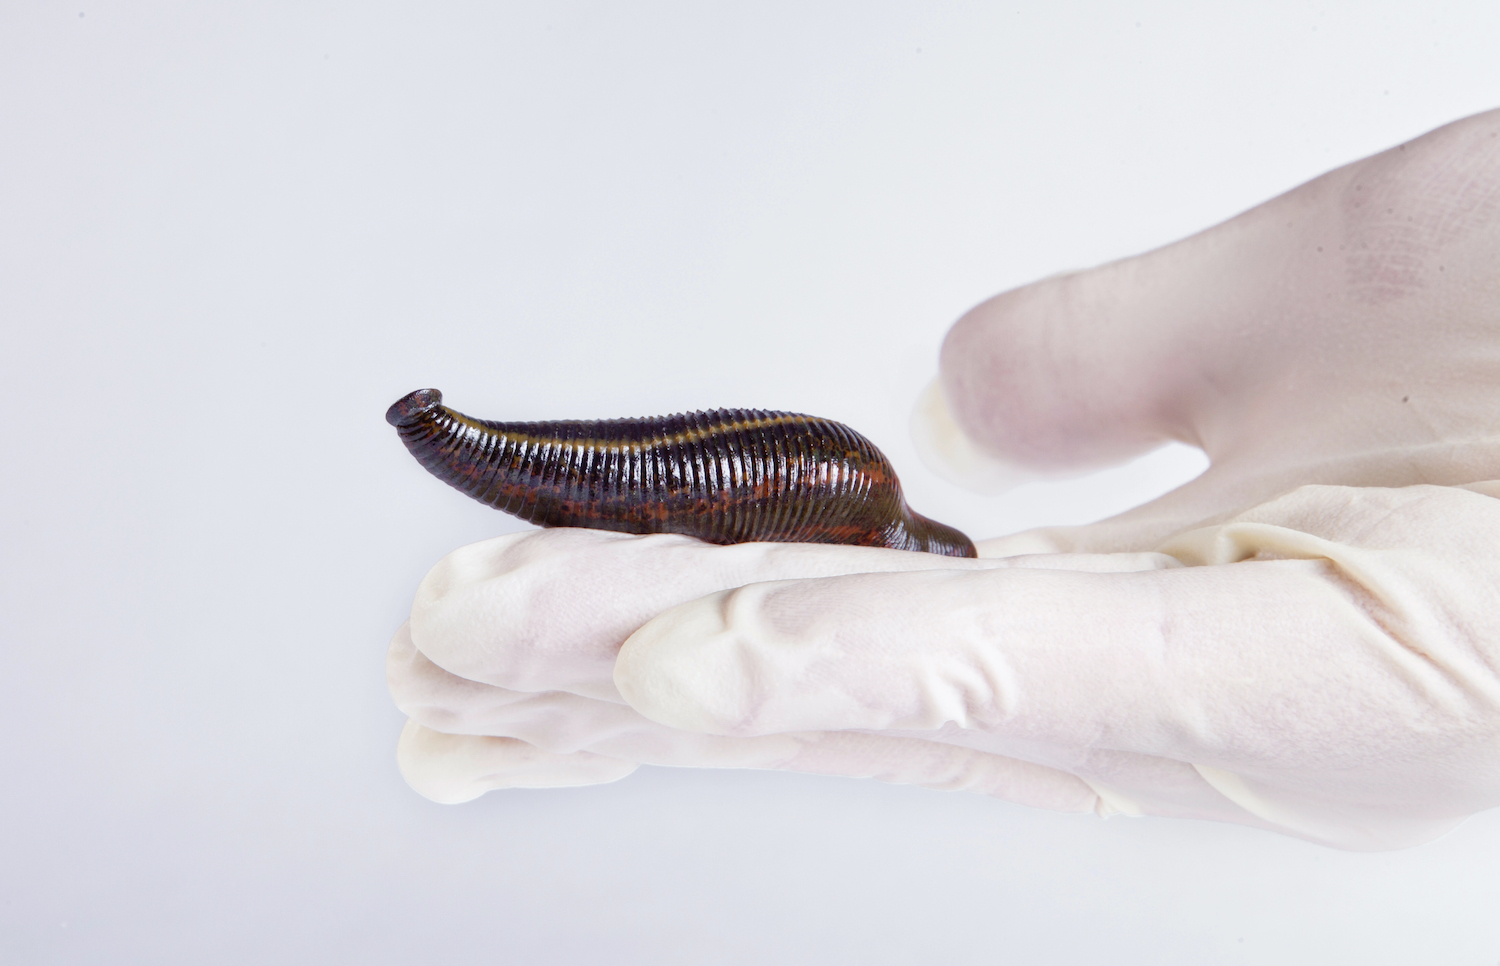 Leeches for rheumatic diseases. How can leech therapy help with joint pain?